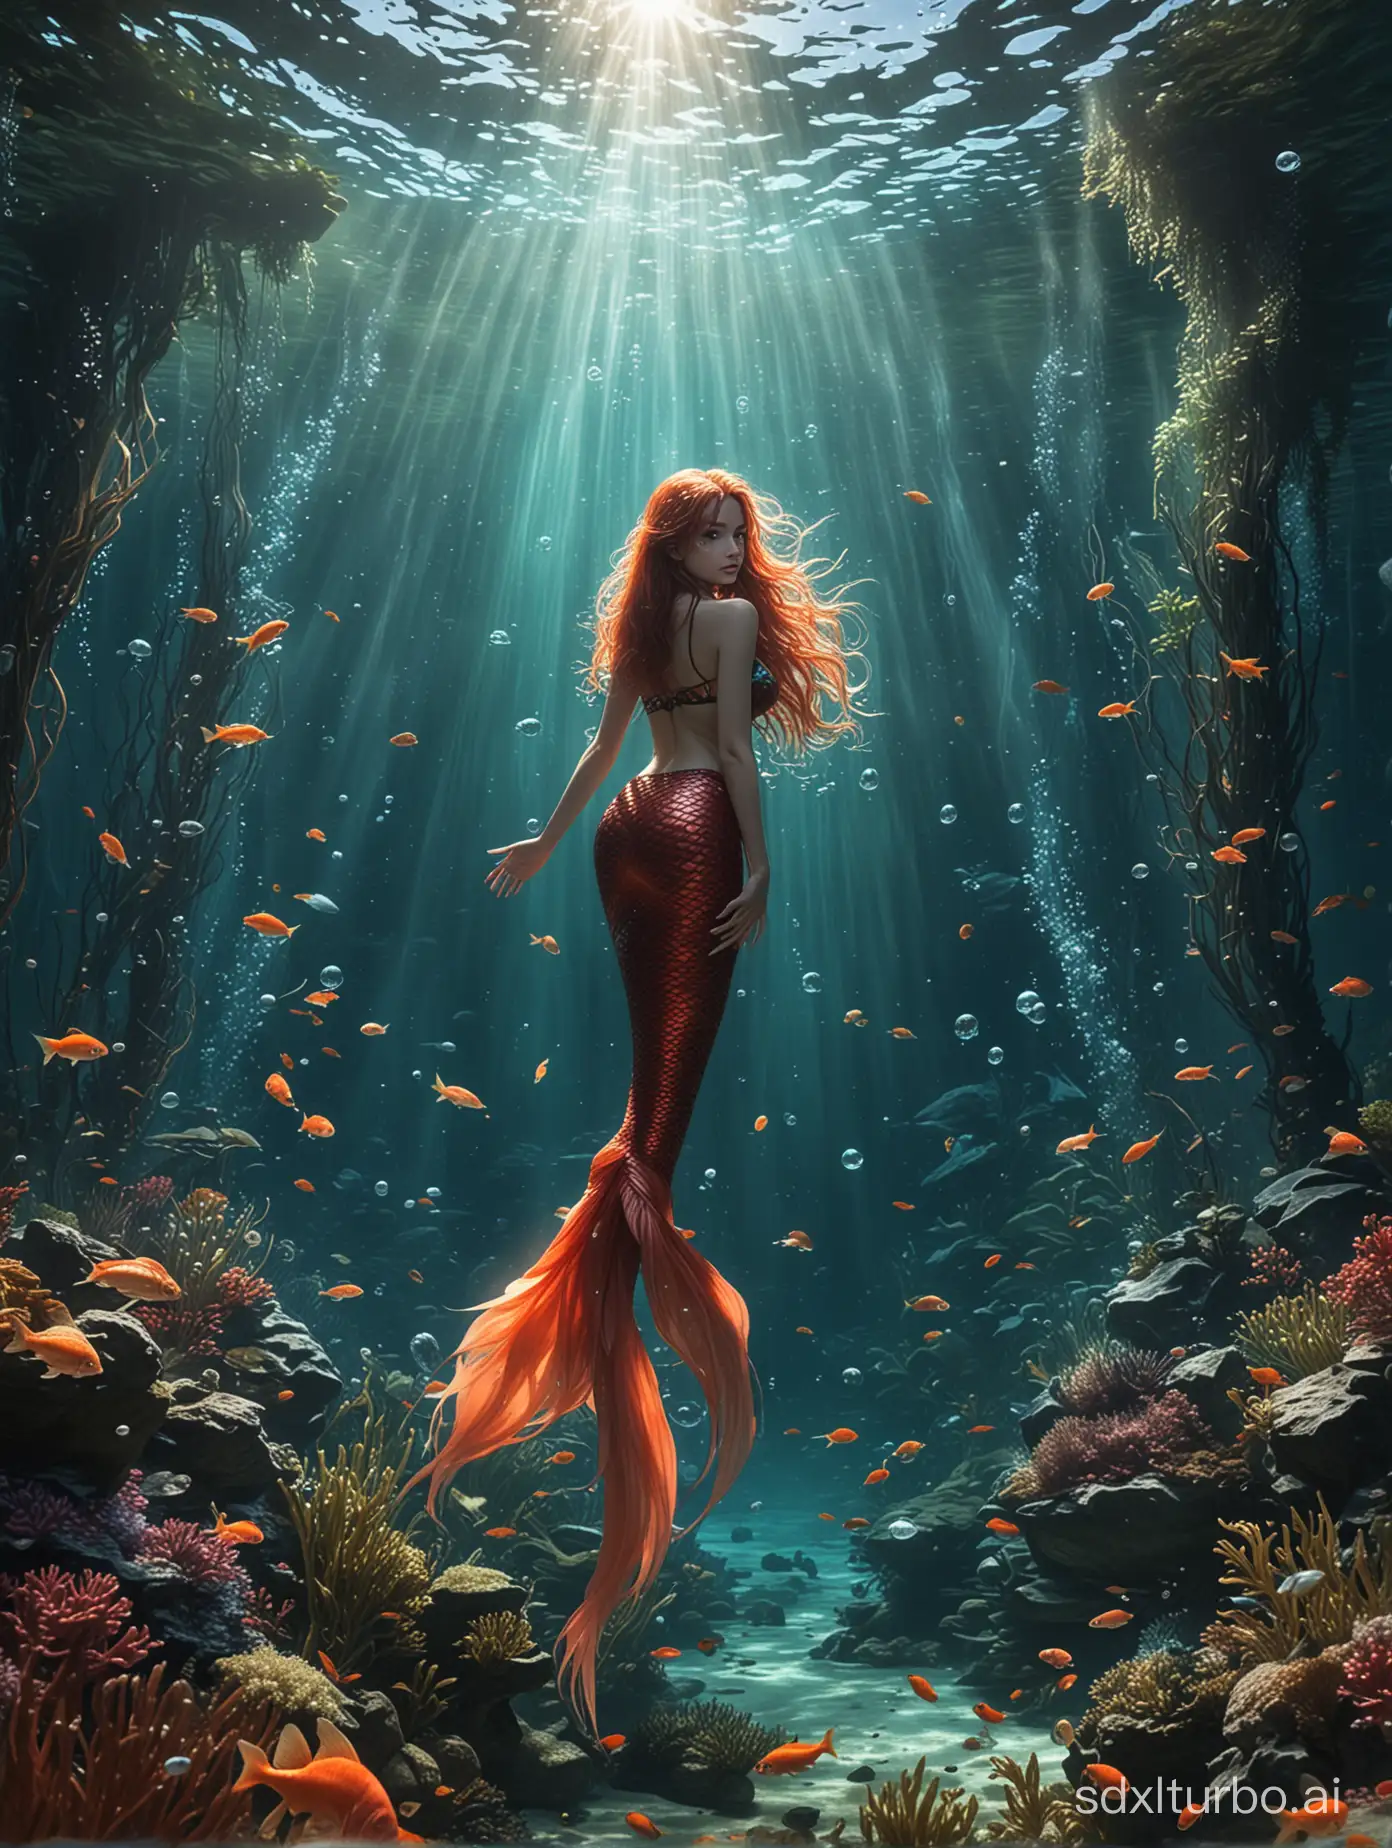 Prompt: 1girl,solo,mermaid,(((full body))),long hair,dynamic angle,make up,underwater,beautiful detailed water,coral,dynamic angle,floating,floating hair,fishes,underwater forest,drenched,seaweed,fish,Tyndall effect,from below,a very long fish tail,Looking down at the audience, The mermaid,a girl,It has a beautiful posture,surrounded by sardine,beautiful water plants in the foreground,sparkling corals in the distance,beautiful bubbles,full body photos,ultra wide-angle lens,depth of field,Beautiful composition,unified 8k wallpaper,super details,aesthetics,masterpiece,best quality,photos,masterpiece,authenticity,very detailed: complex details:1.3,Real scene,real light and shadow,real photos:1.32,8k,masterpiece,photos,mermaid,watercolor senery,red koi tail,big tail,